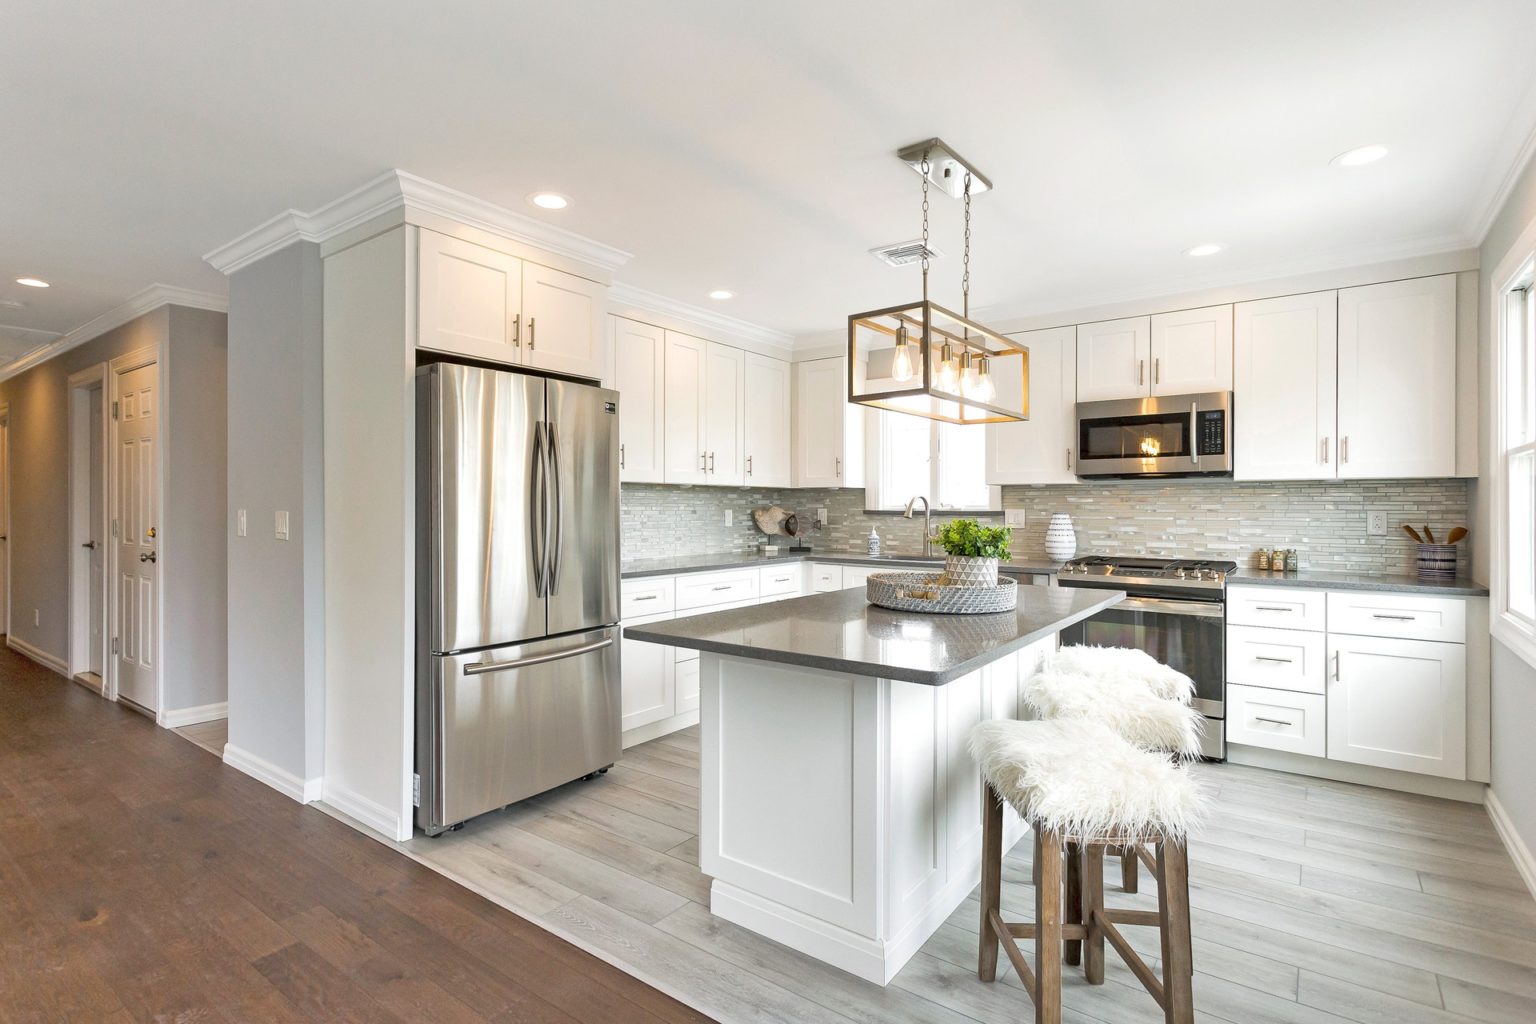 Kitchen Design Trends For 2021 - Home and Garden News